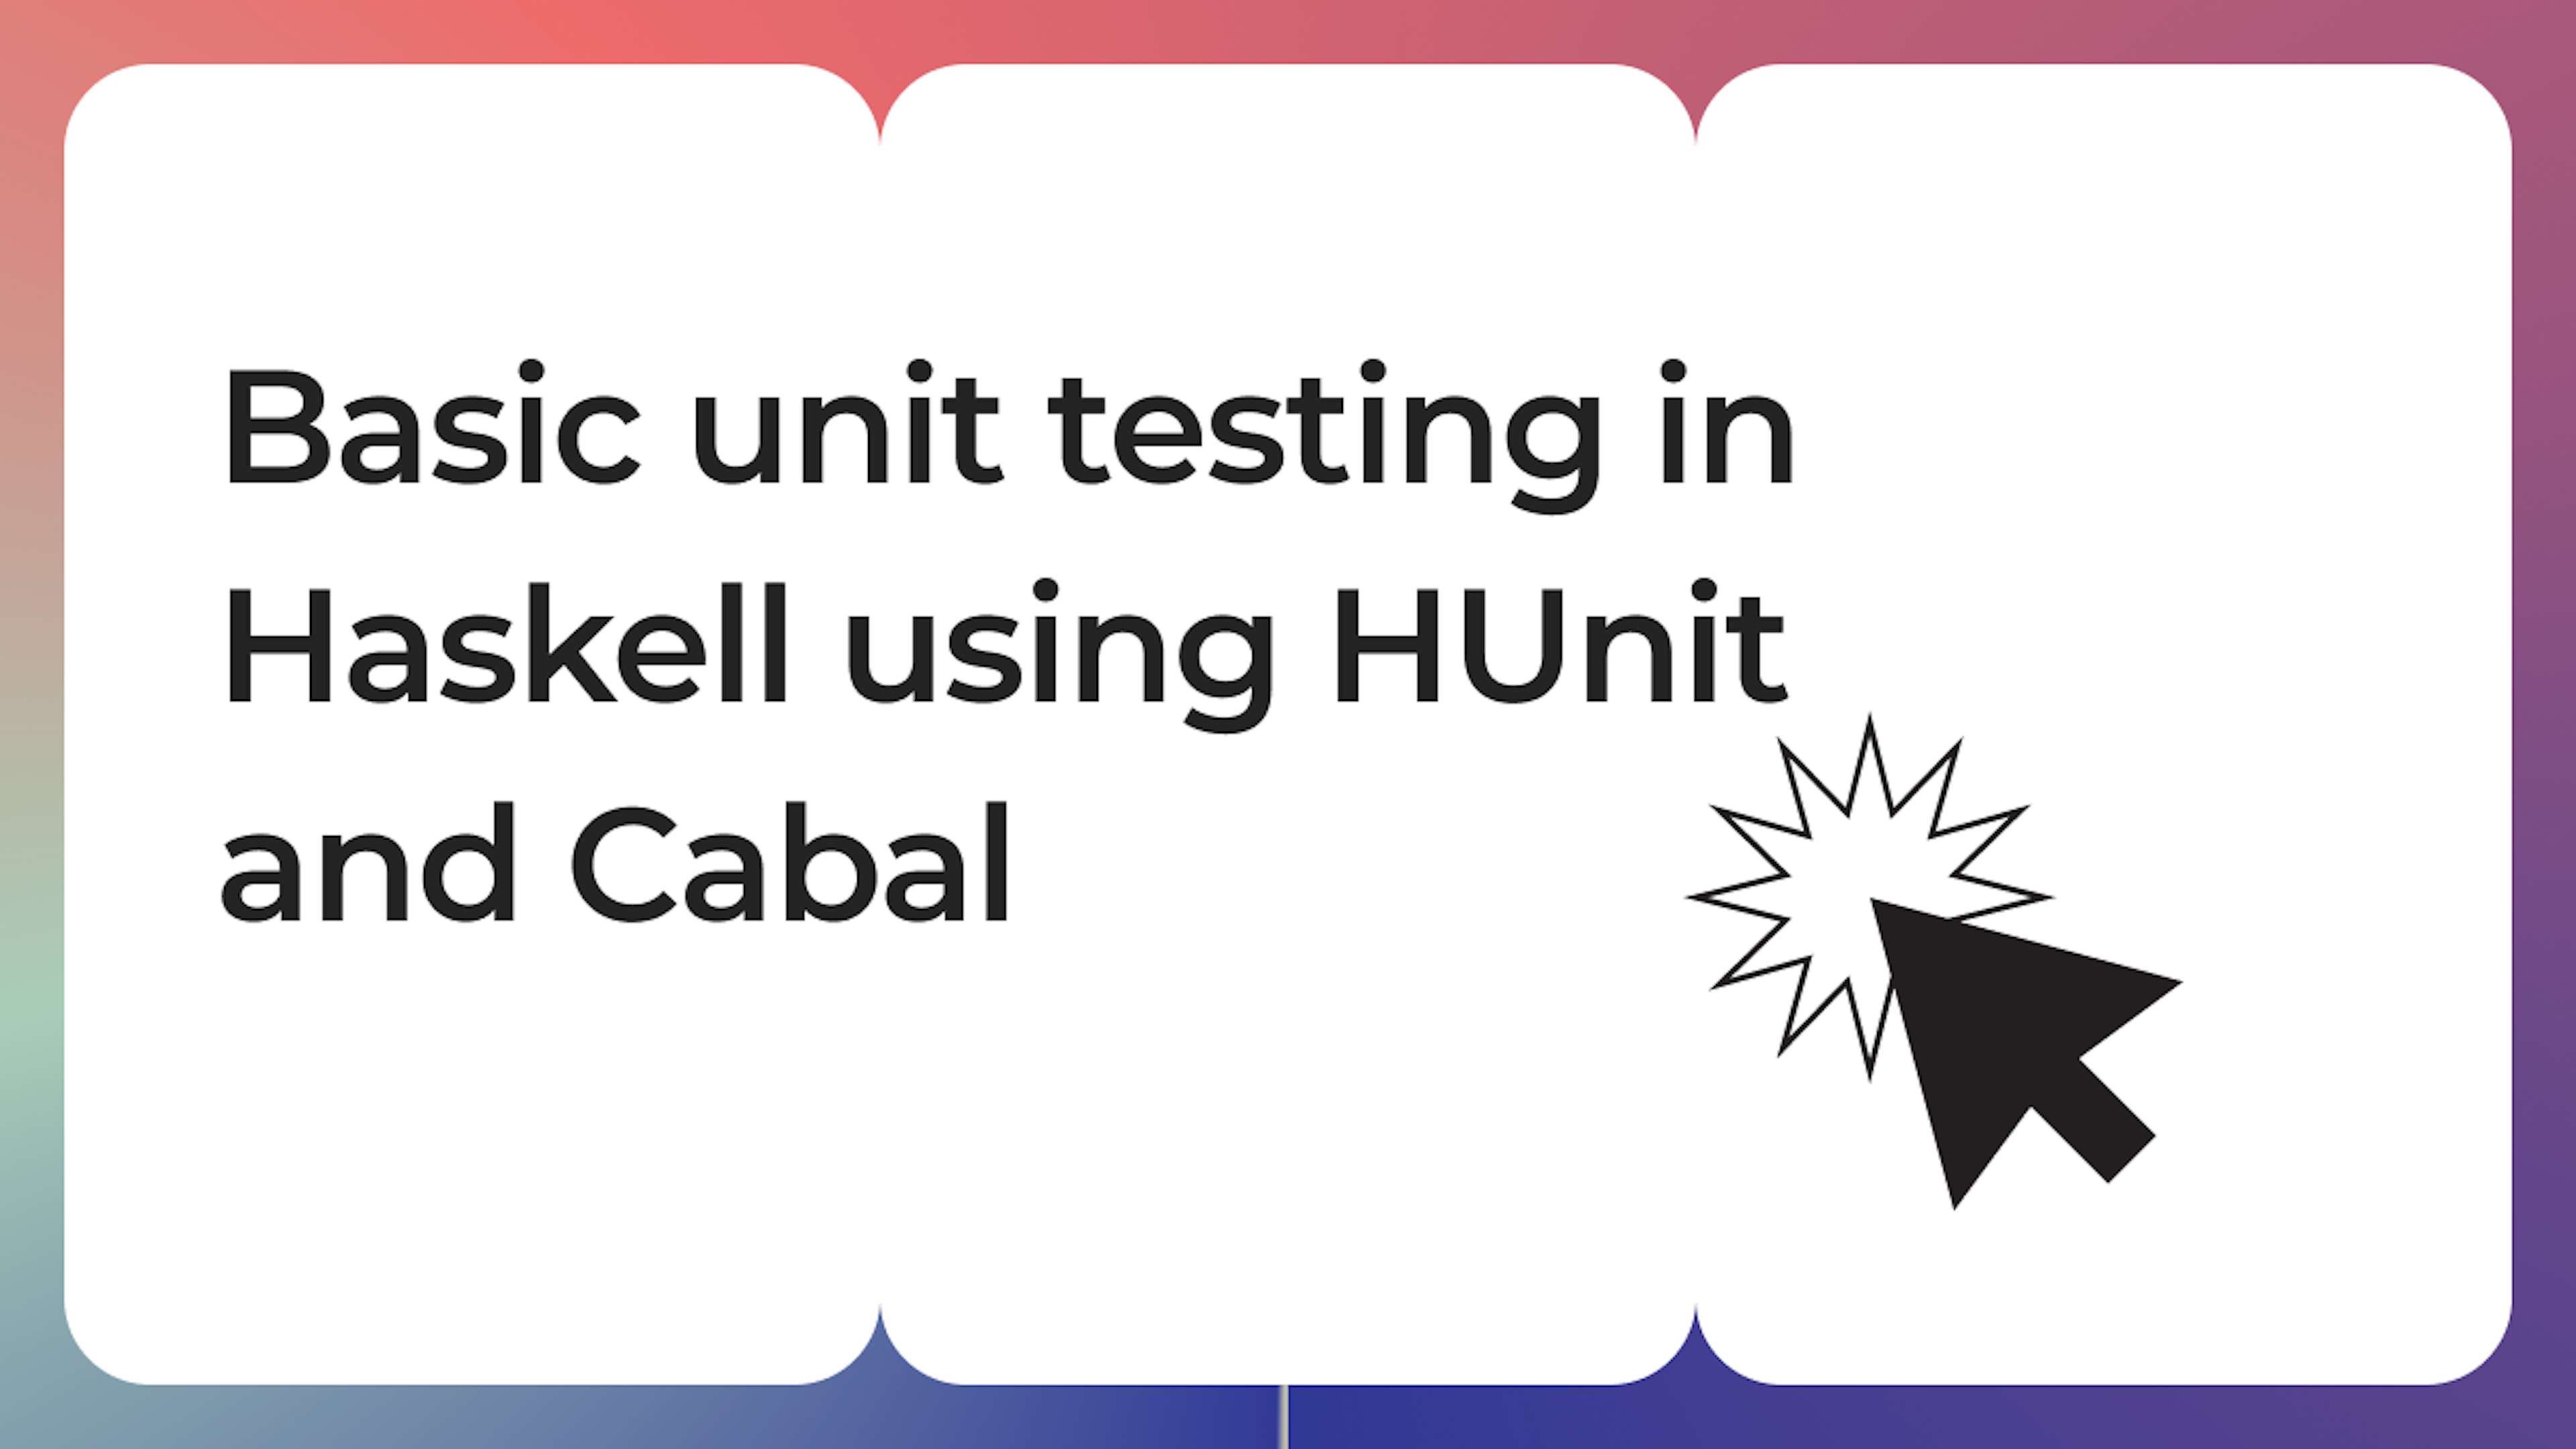 Basic unit testing in Haskell using HUnit and Cabal